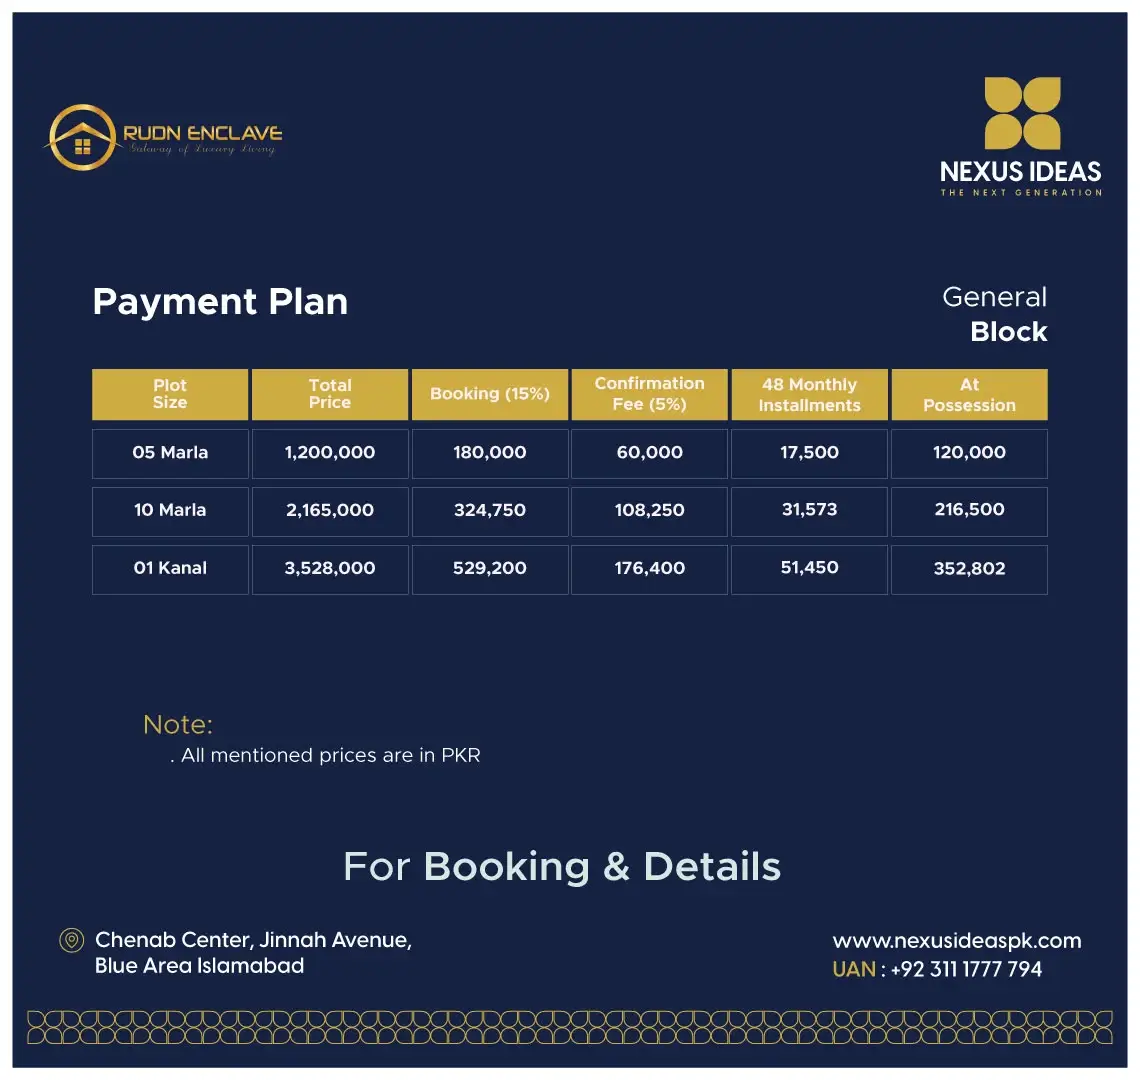 Rudn Enclave islamabad general block payment plan